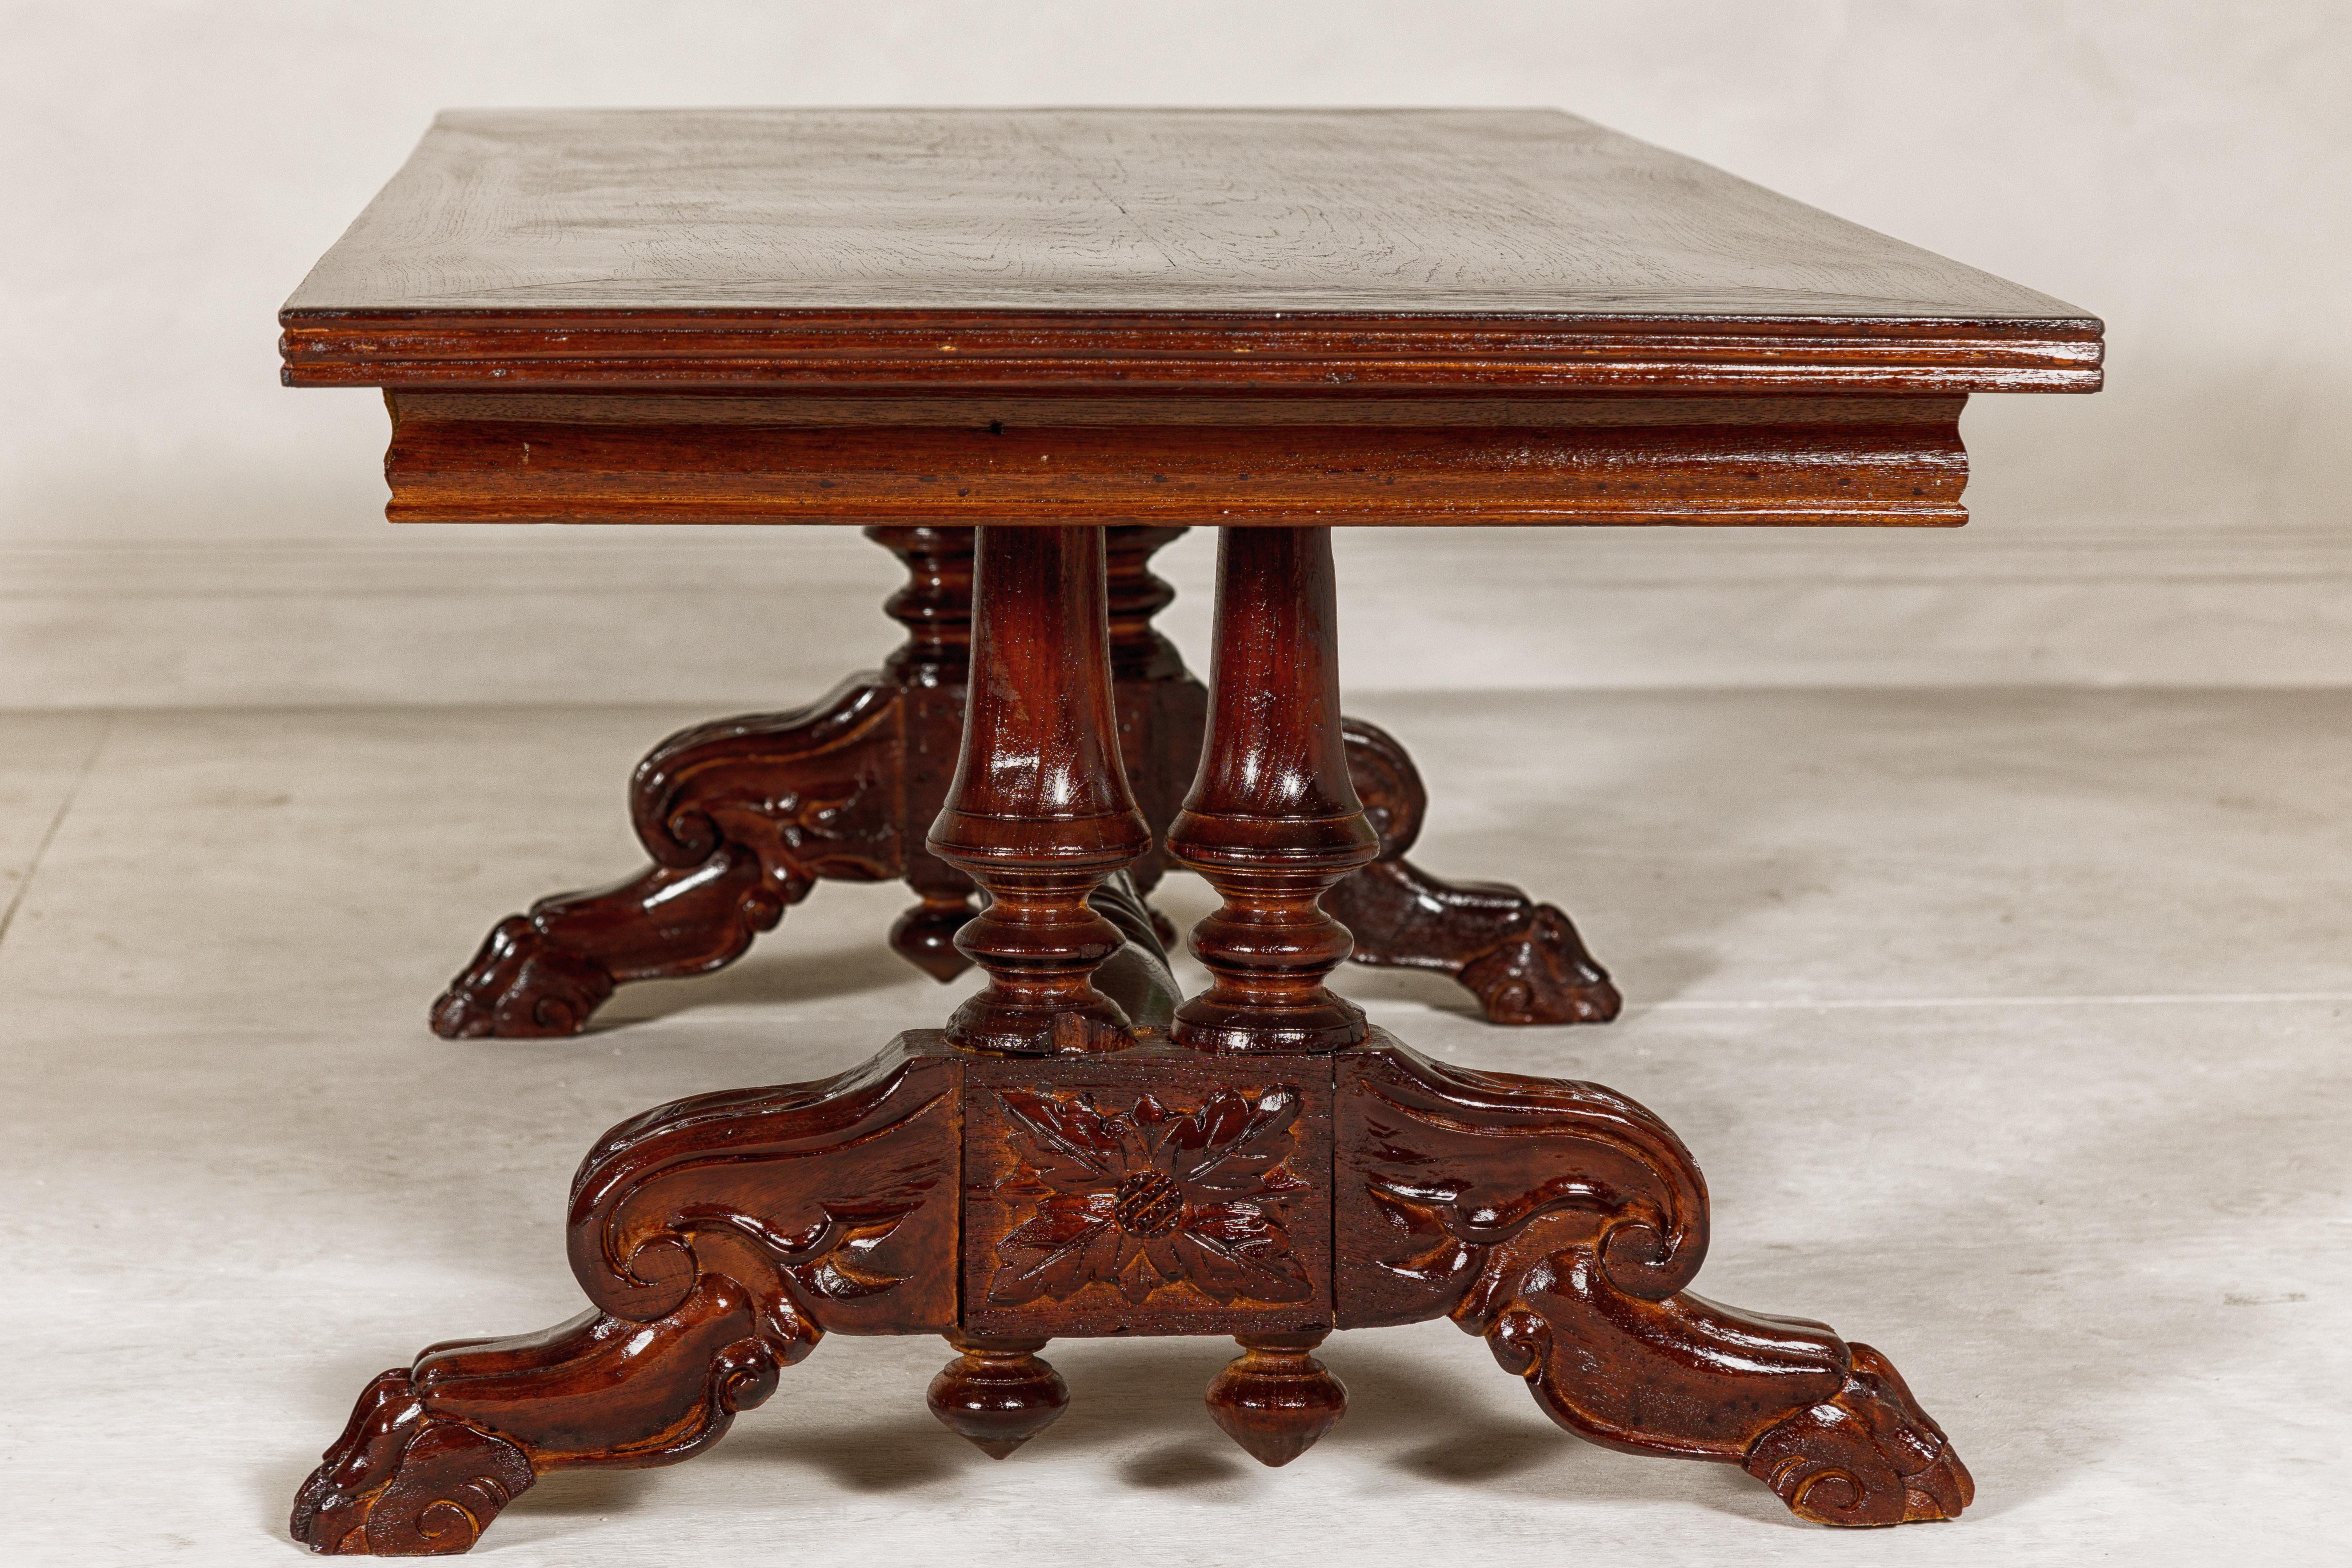 Dutch Colonial Ornate Coffee Table with Carved Lion Paw Legs and Cross Stretcher For Sale 7